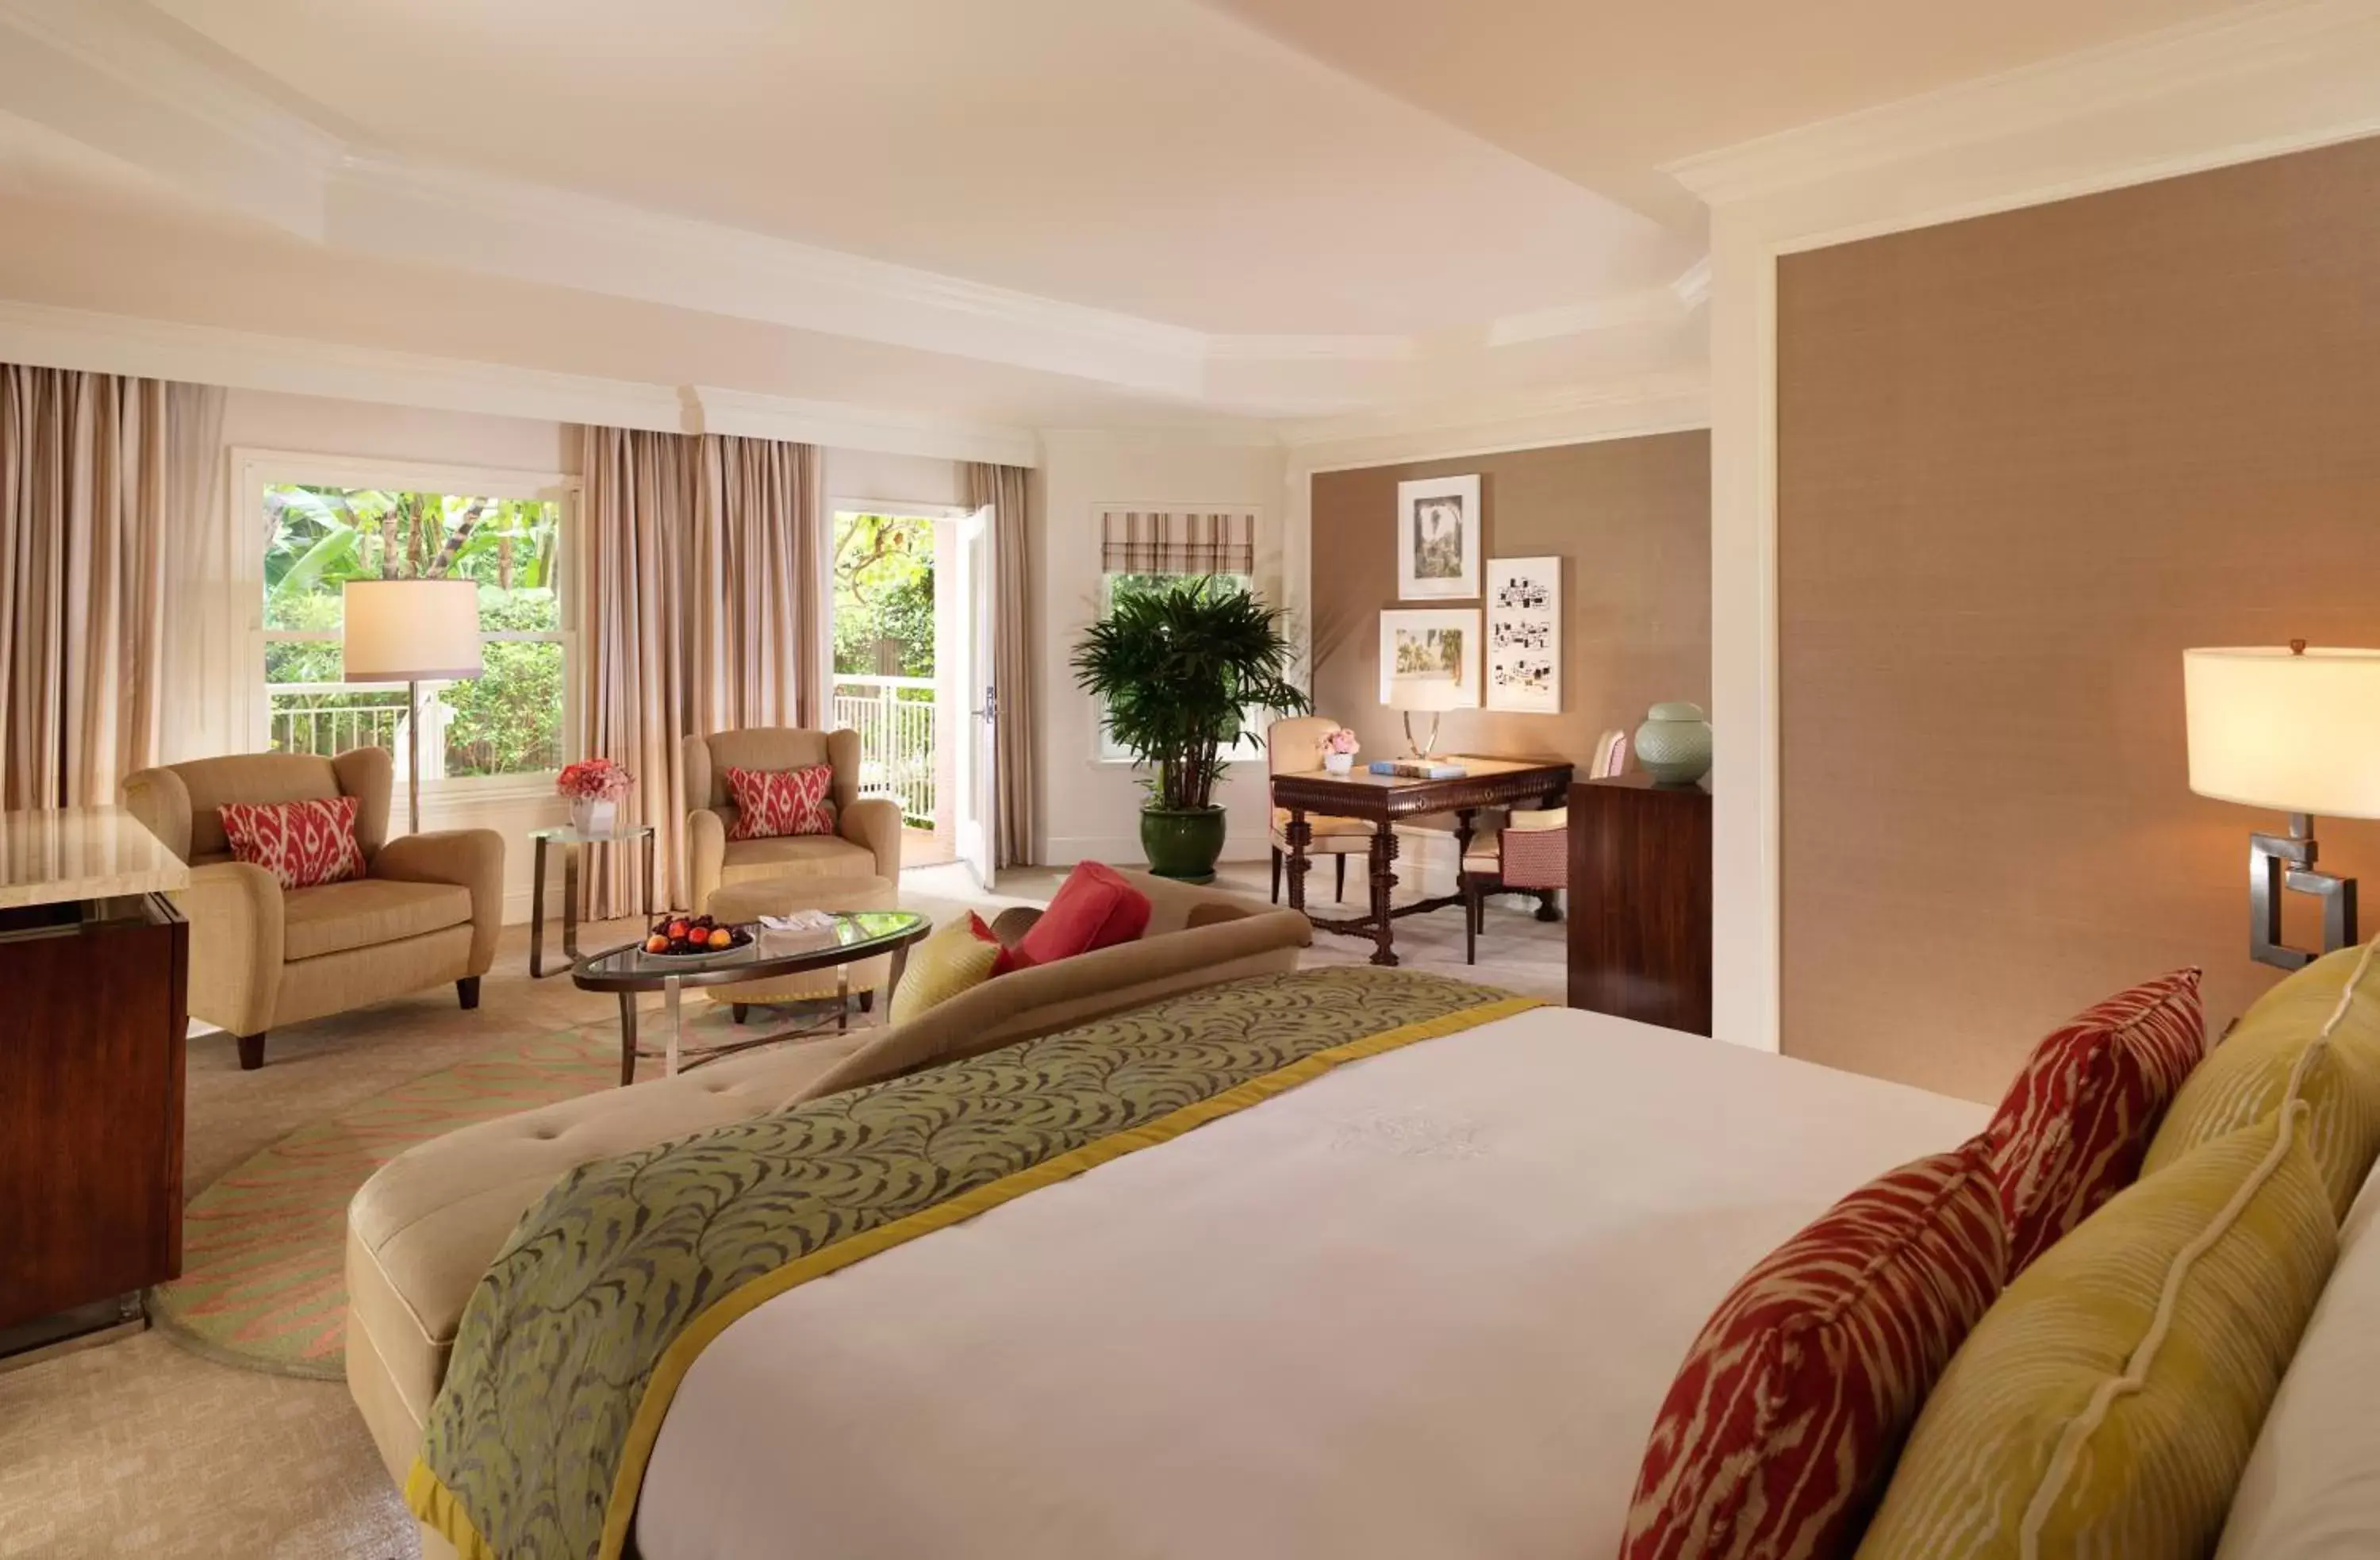 Bedroom in The Beverly Hills Hotel - Dorchester Collection